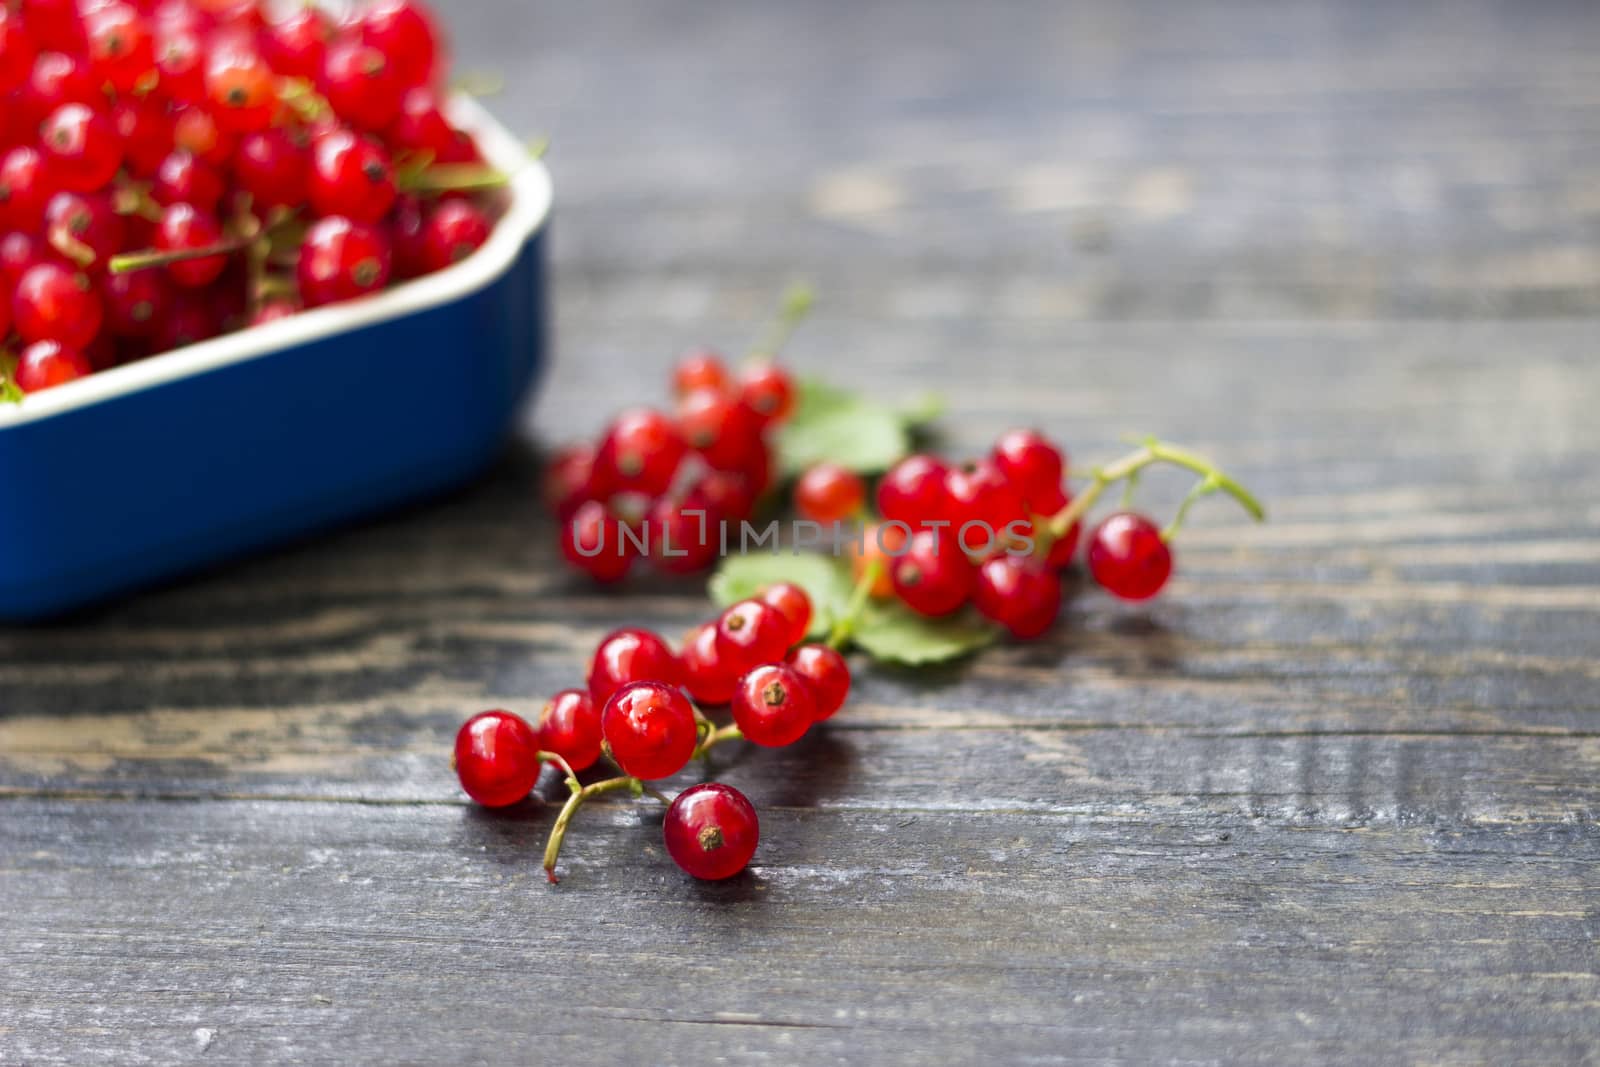 Harvested red currant berries in a small blue bowl